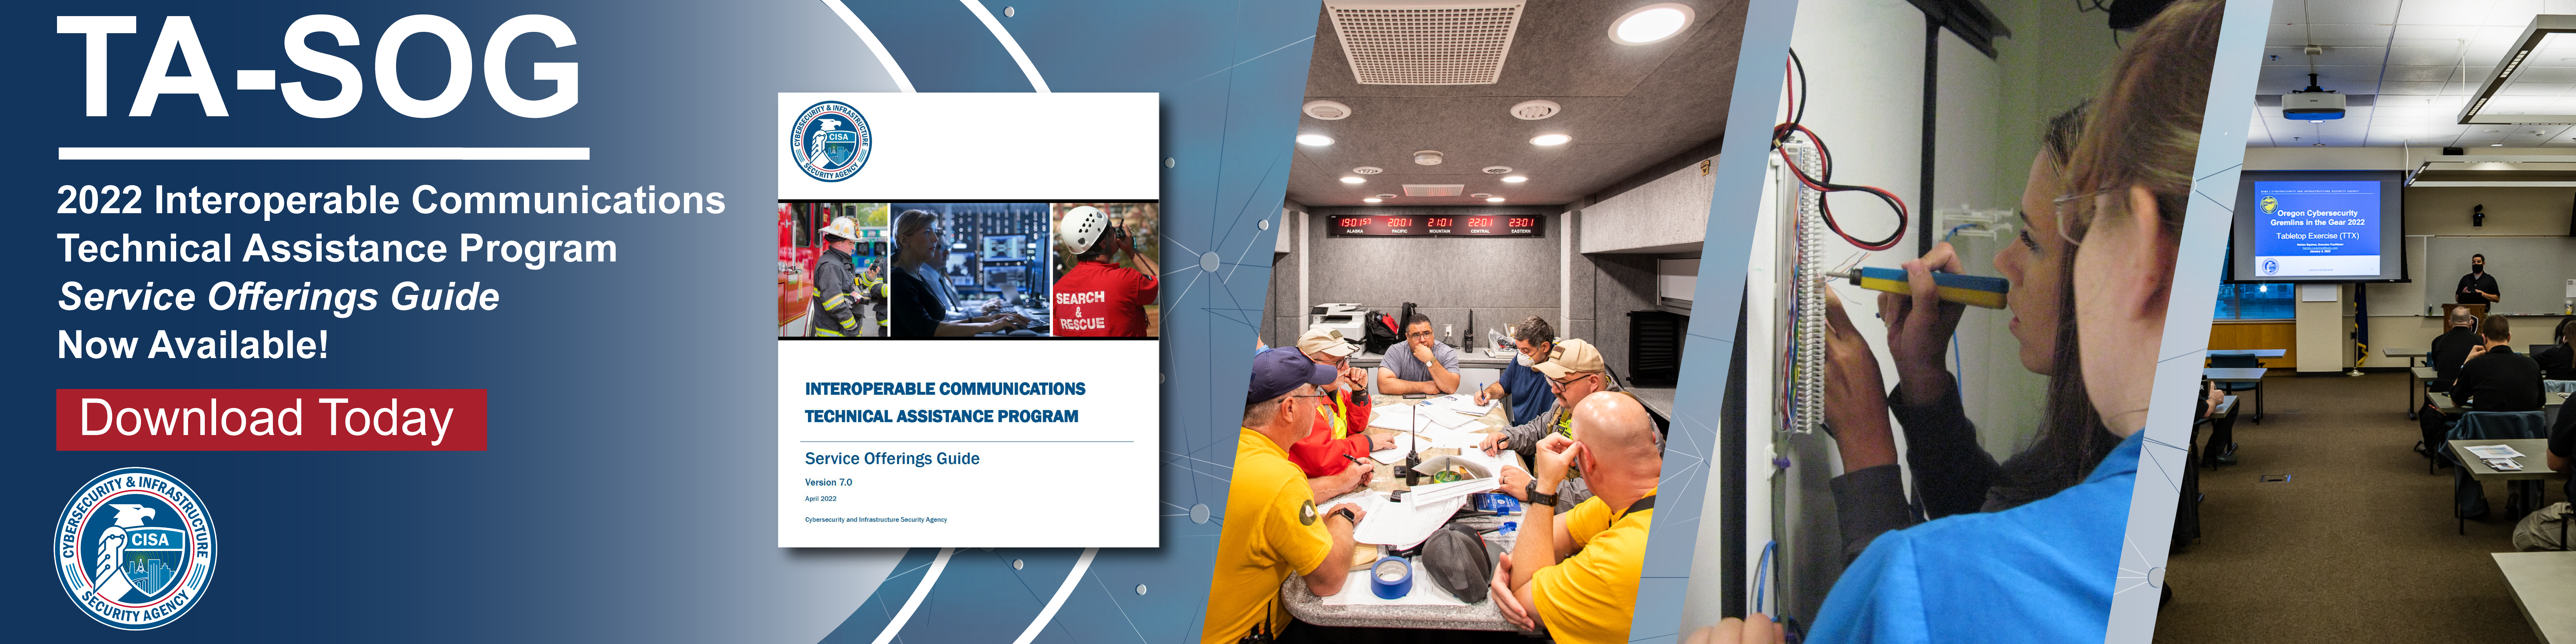 TA-SOG - 2022 Interoperable Communications Technical Assistance Program Service Offerings Guide Now Available - Download Today